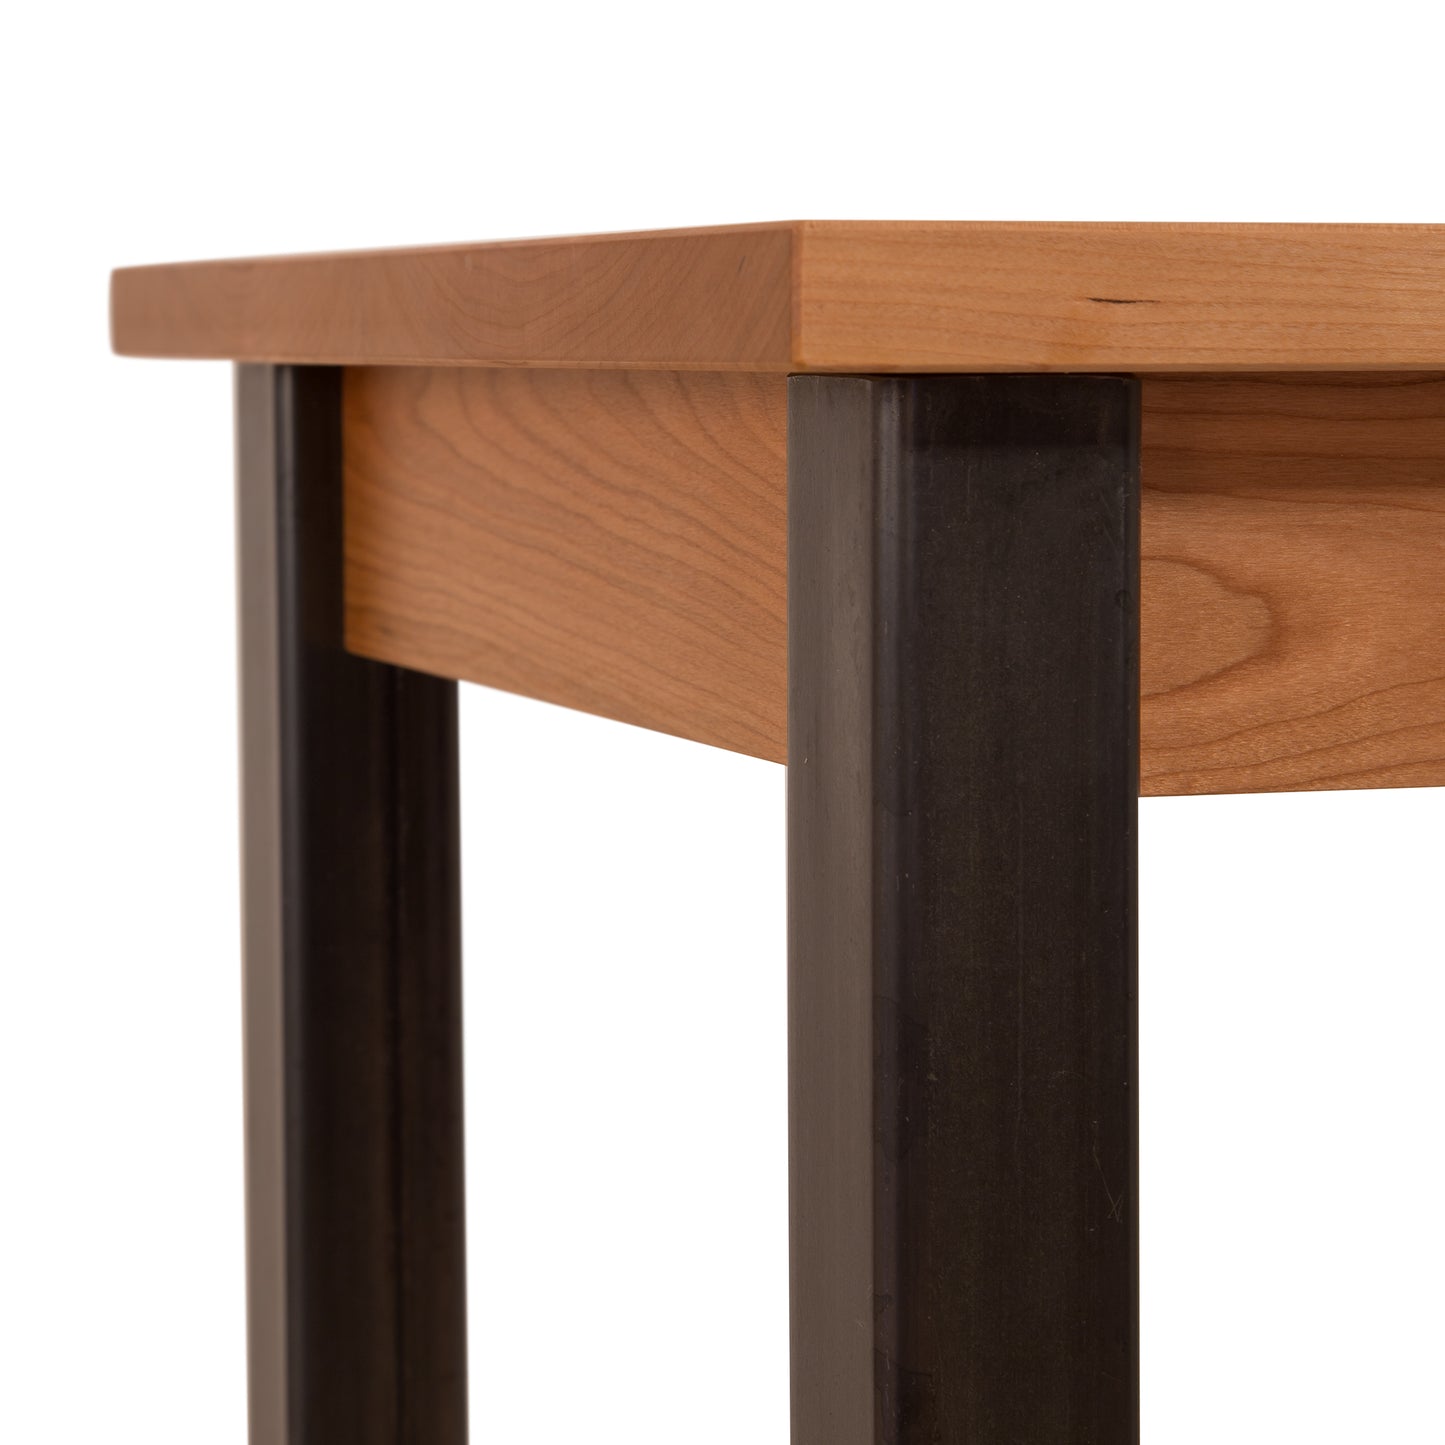 A Lyndon Furniture Contemporary Farmhouse End Table - Clearance with a wooden top and metal legs.